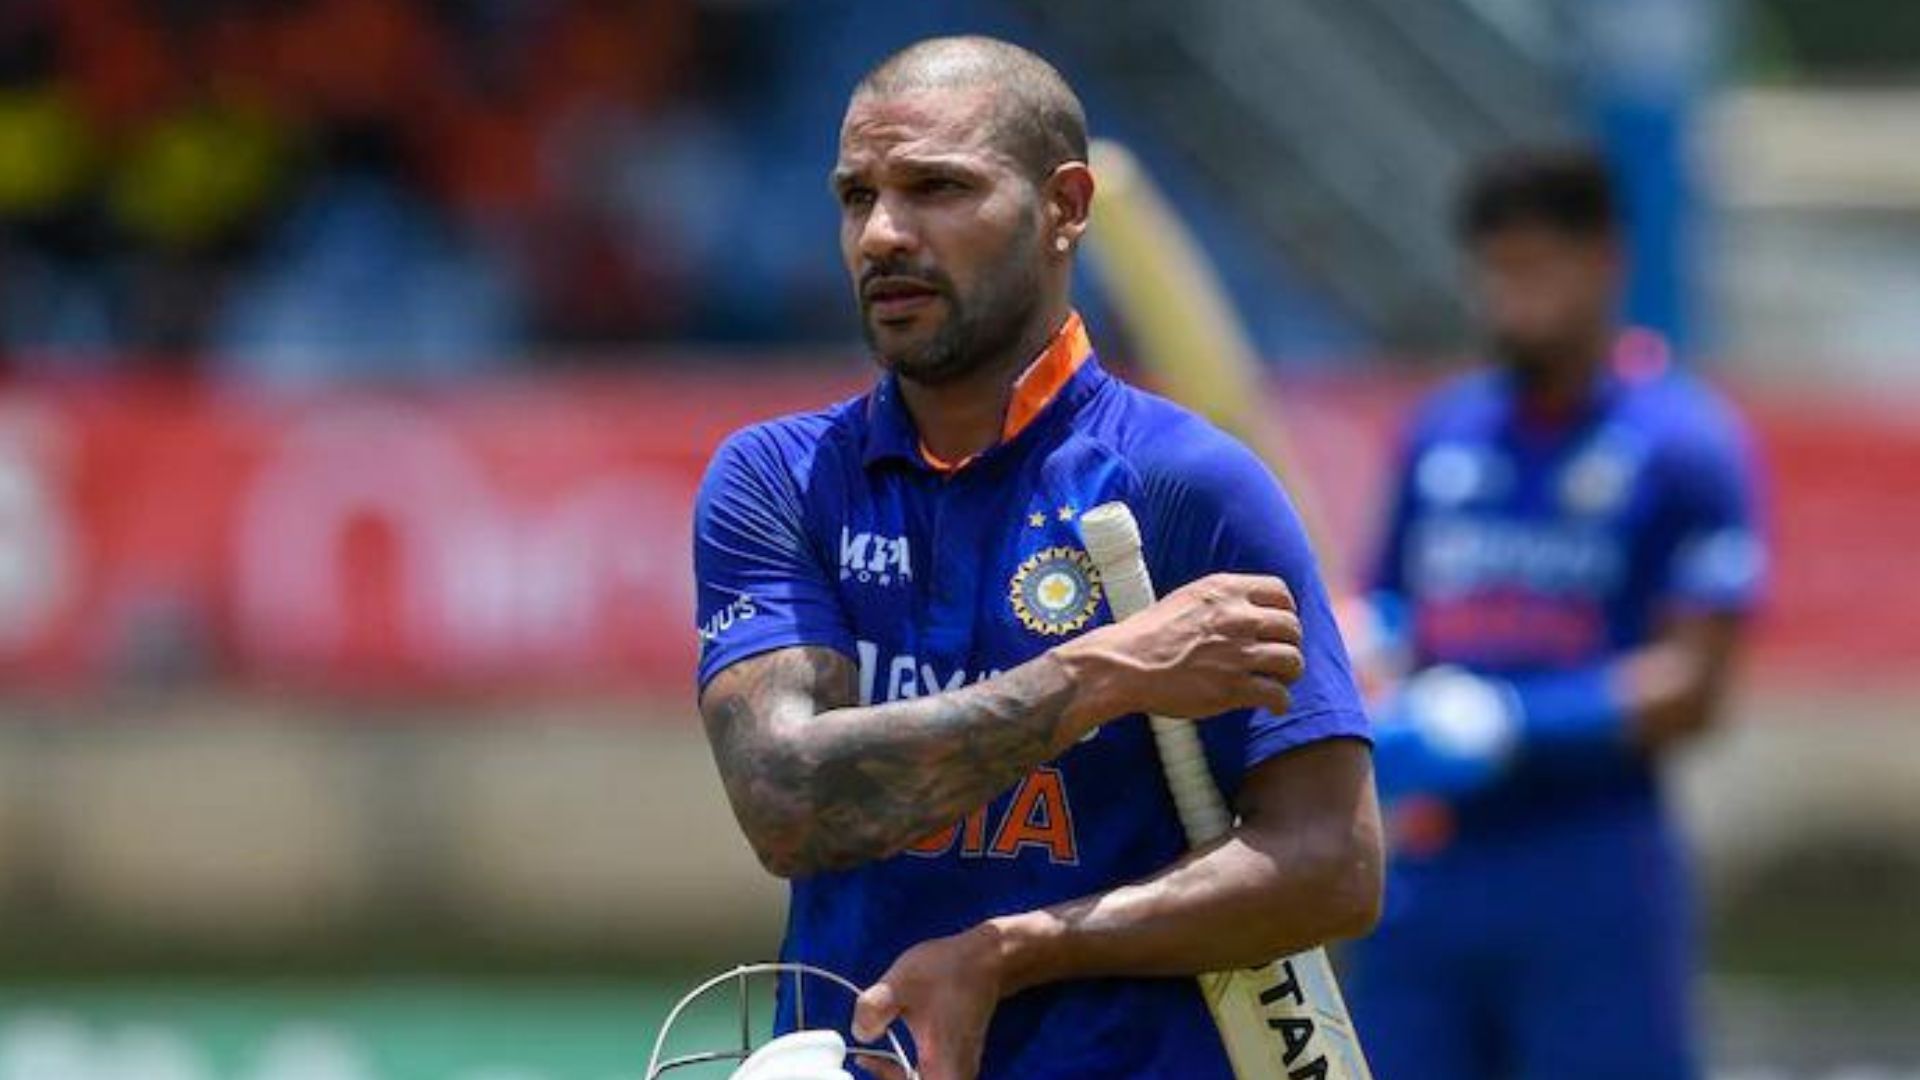 Shikhar Dhawan led India to a 3-0 whitewash against West Indies in July. (P.C.:Twitter)